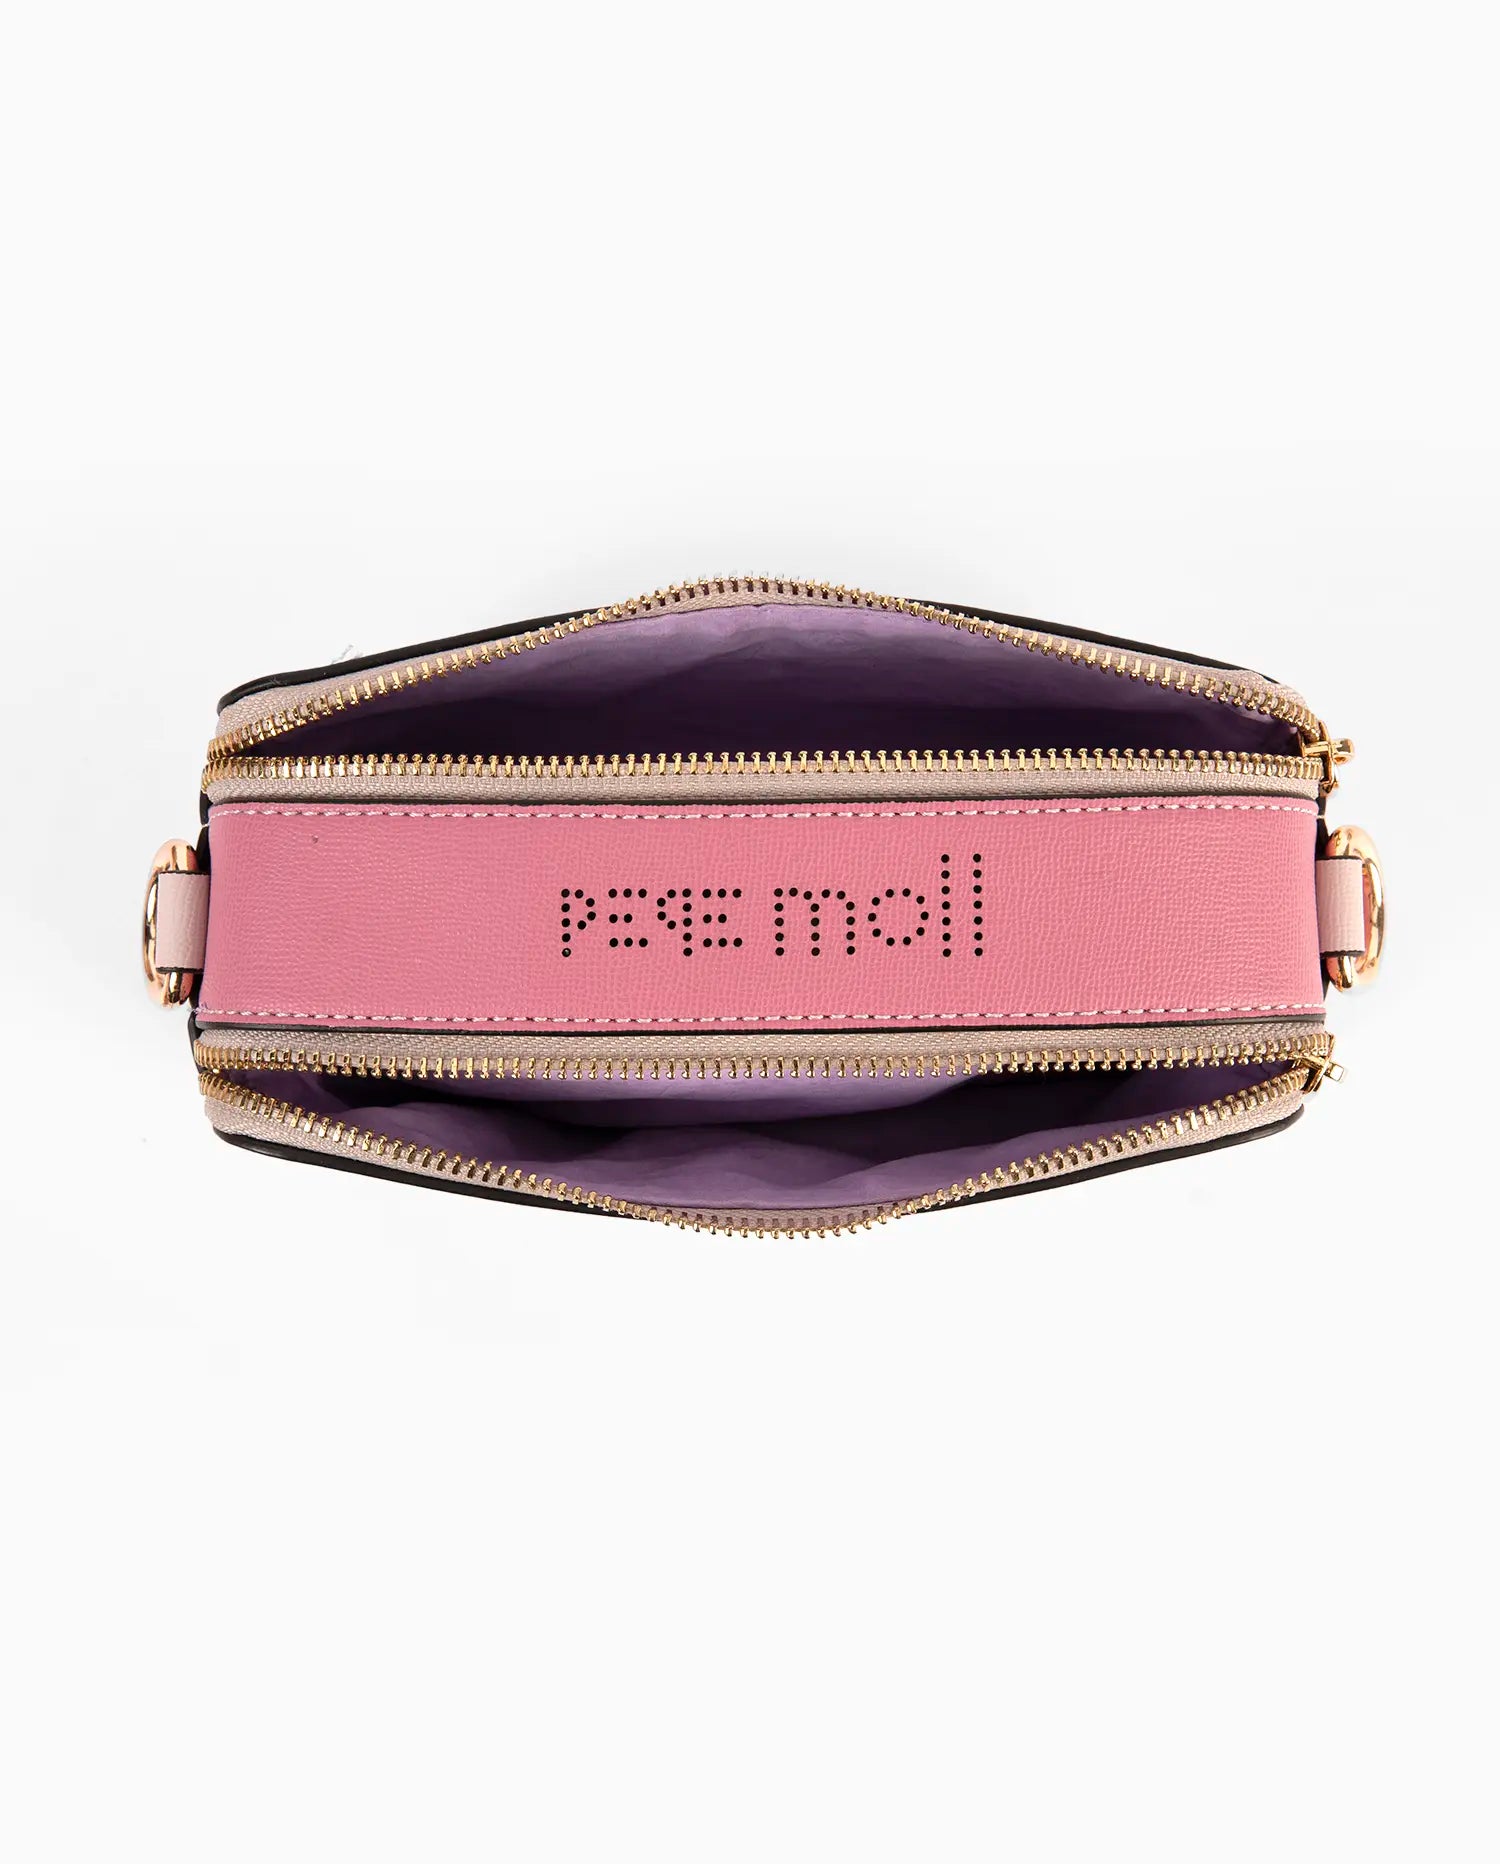  Closeup of the golden details on Pepe Moll crossbody bag 241360, accentuating its modern elegance.